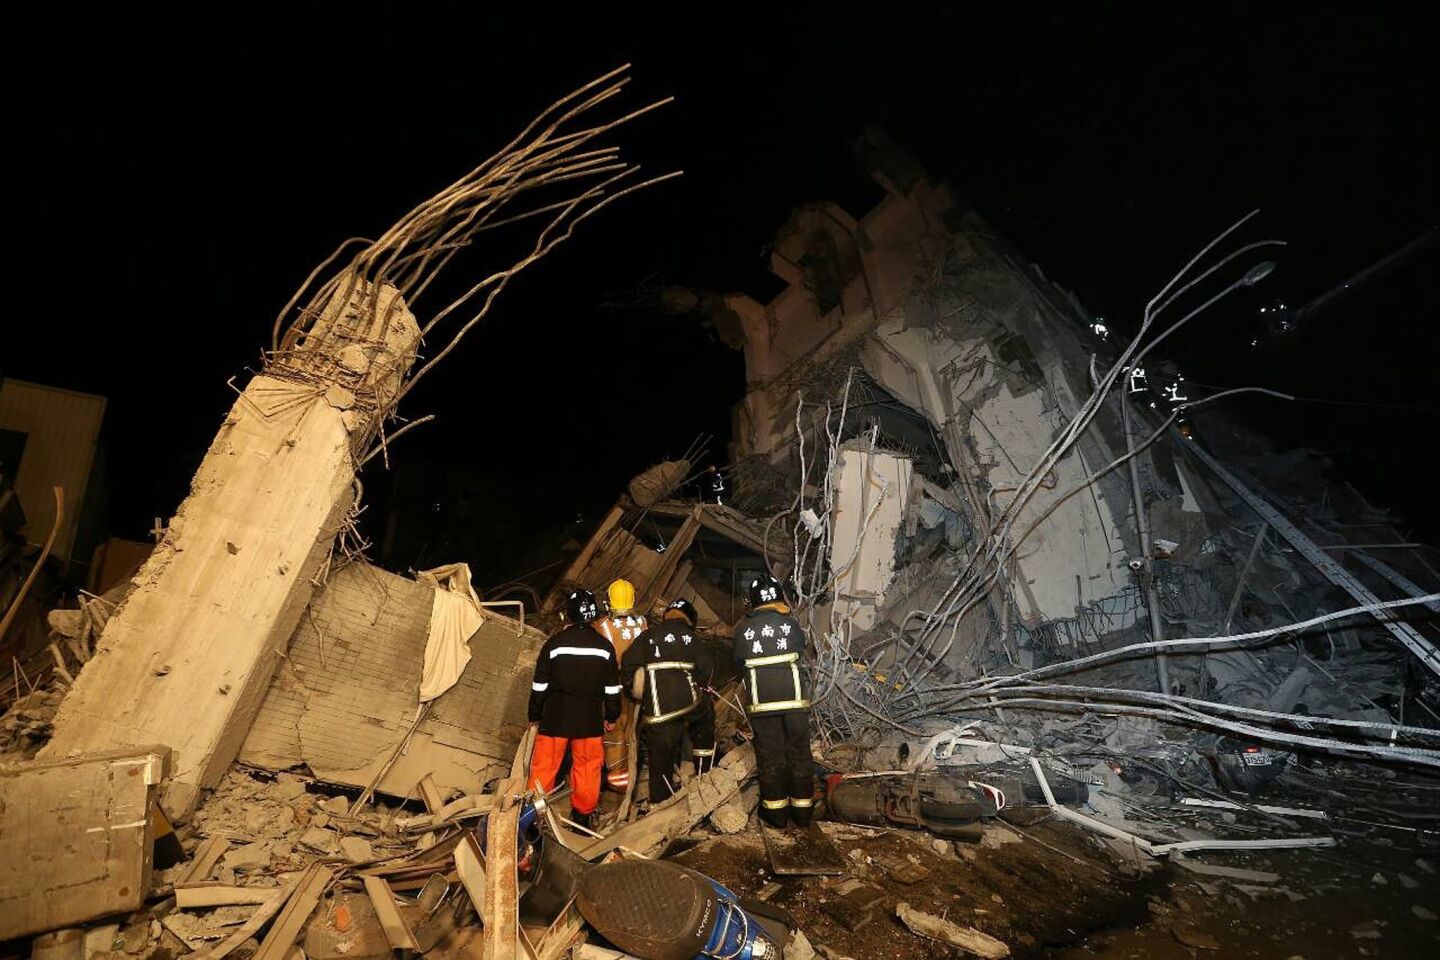 Rescue personnel search through debris at the site of a collapsed building in the southern Taiwanese city of Tainan following a 6.4 magnitude earthquake that struck the island early Feb. 6.